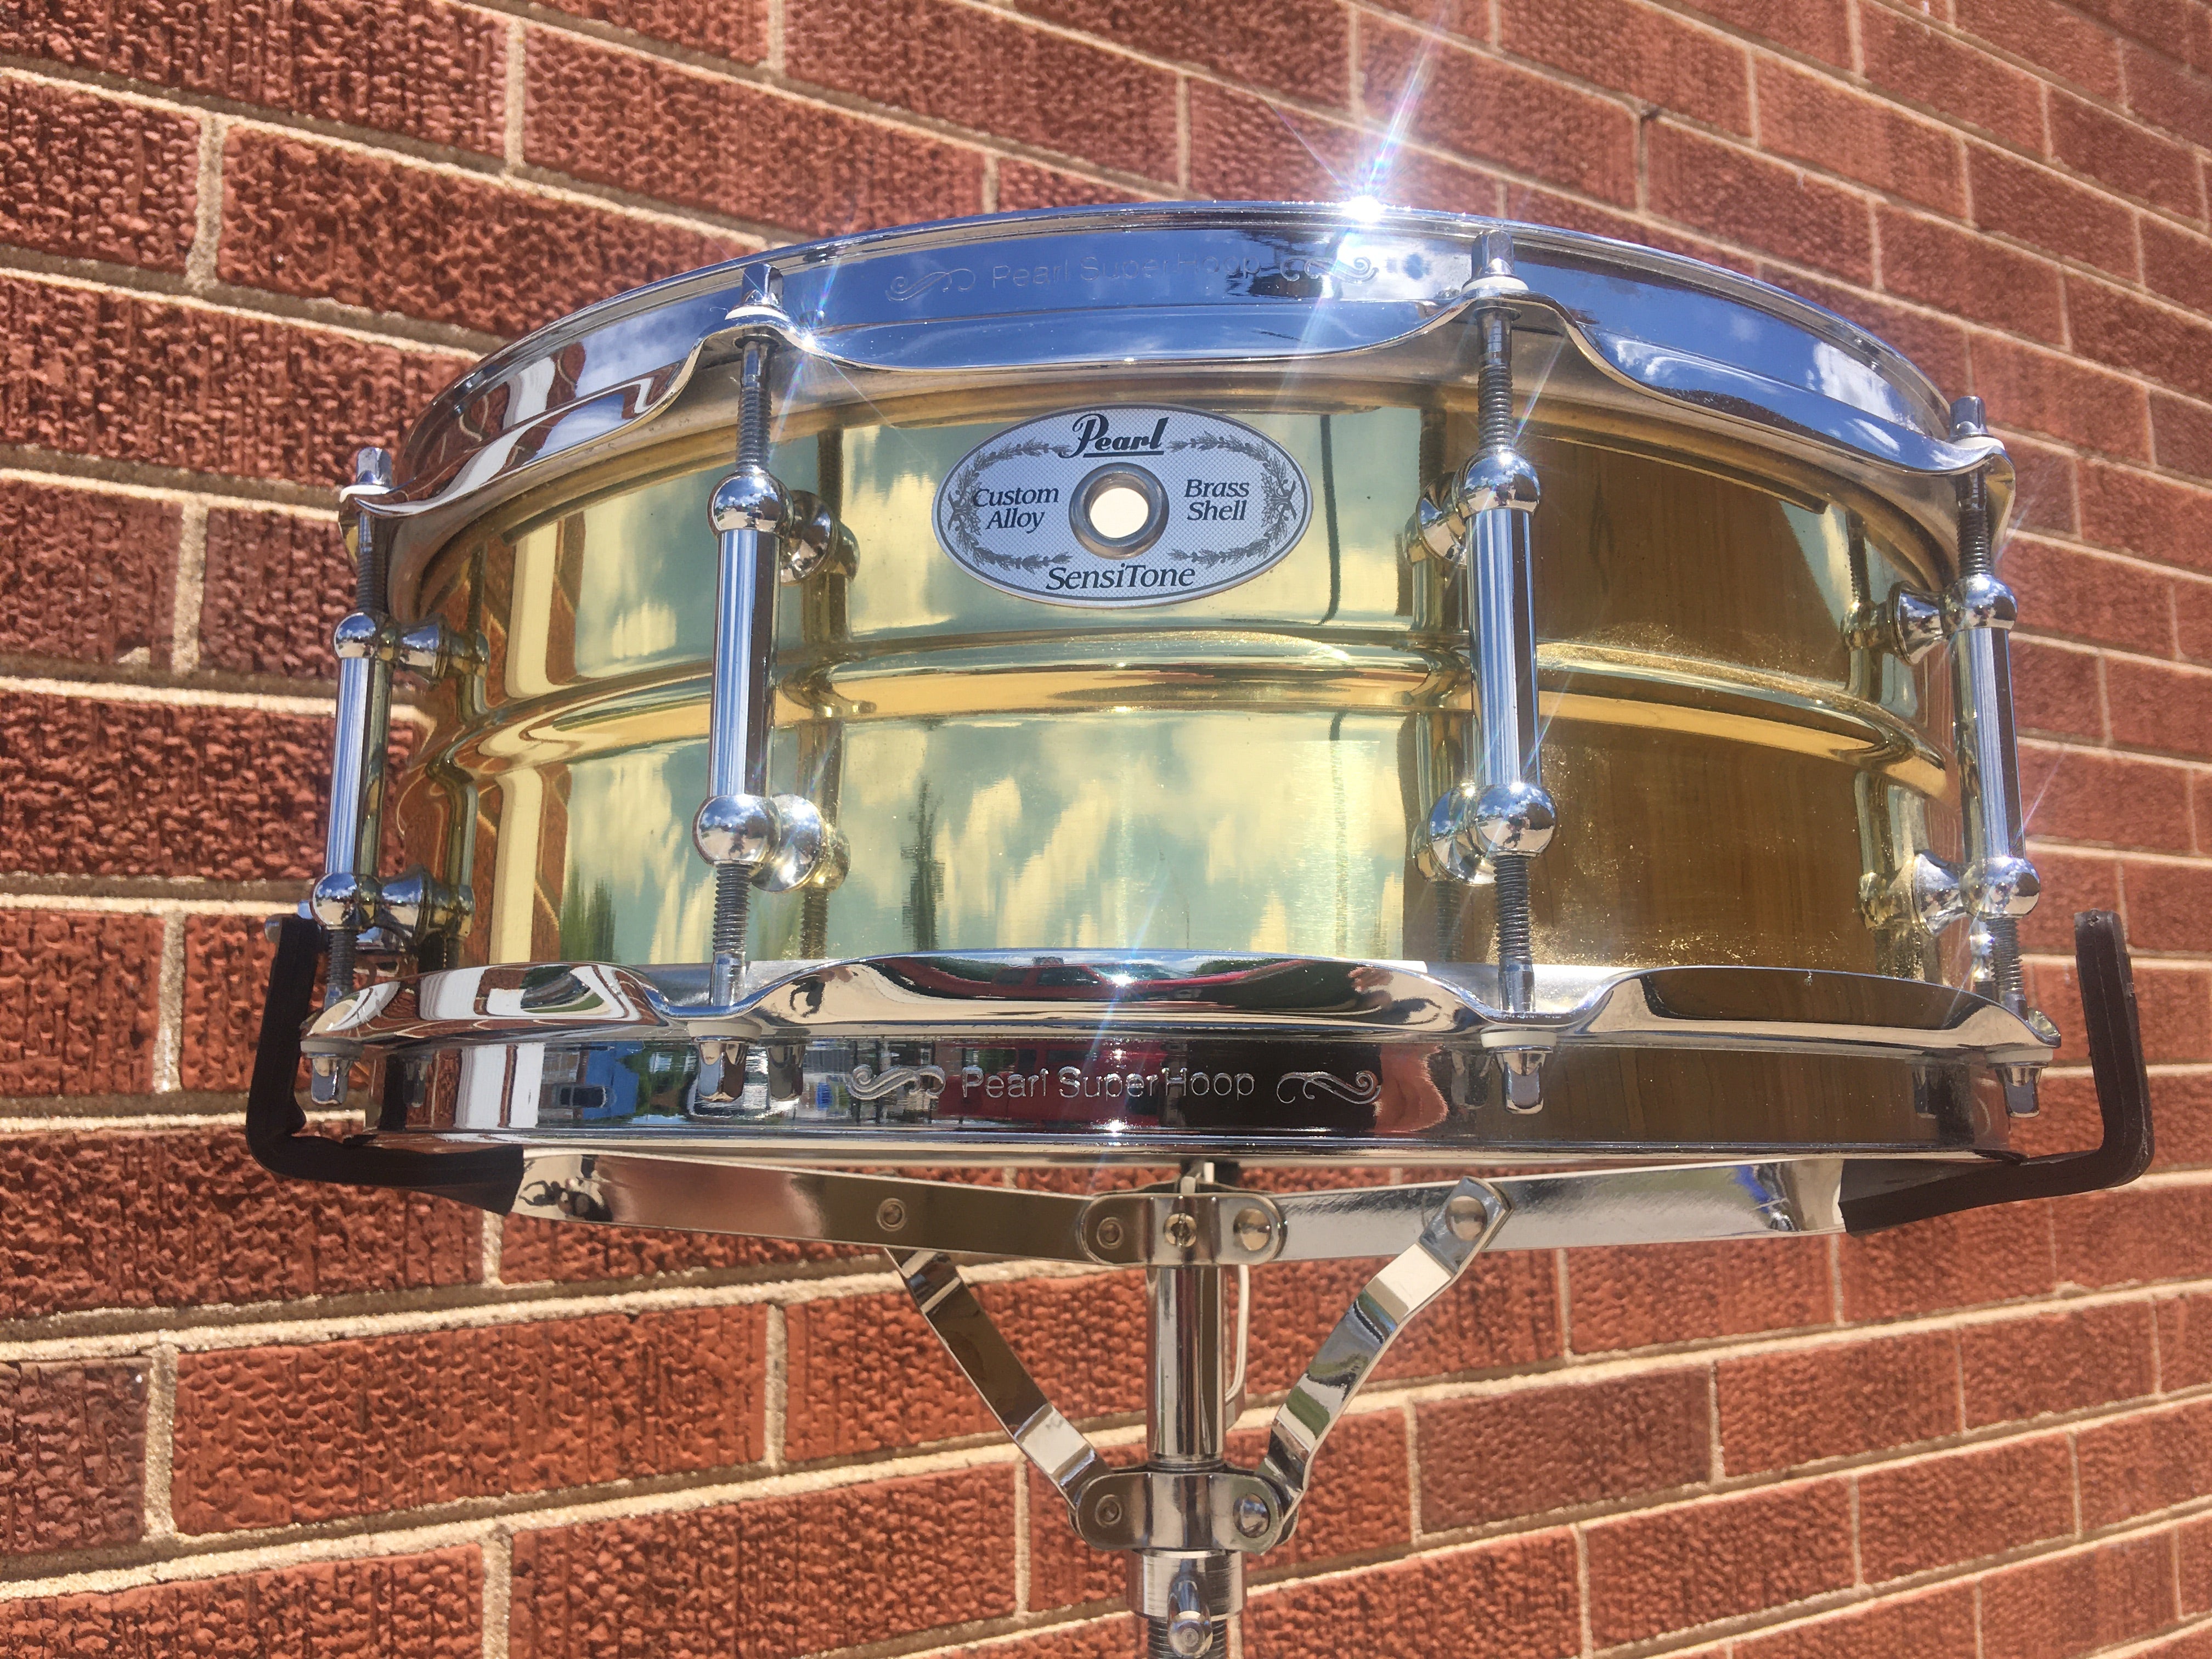 Pearl Sensitone Snare Drum Great Condition With Brand New Drum